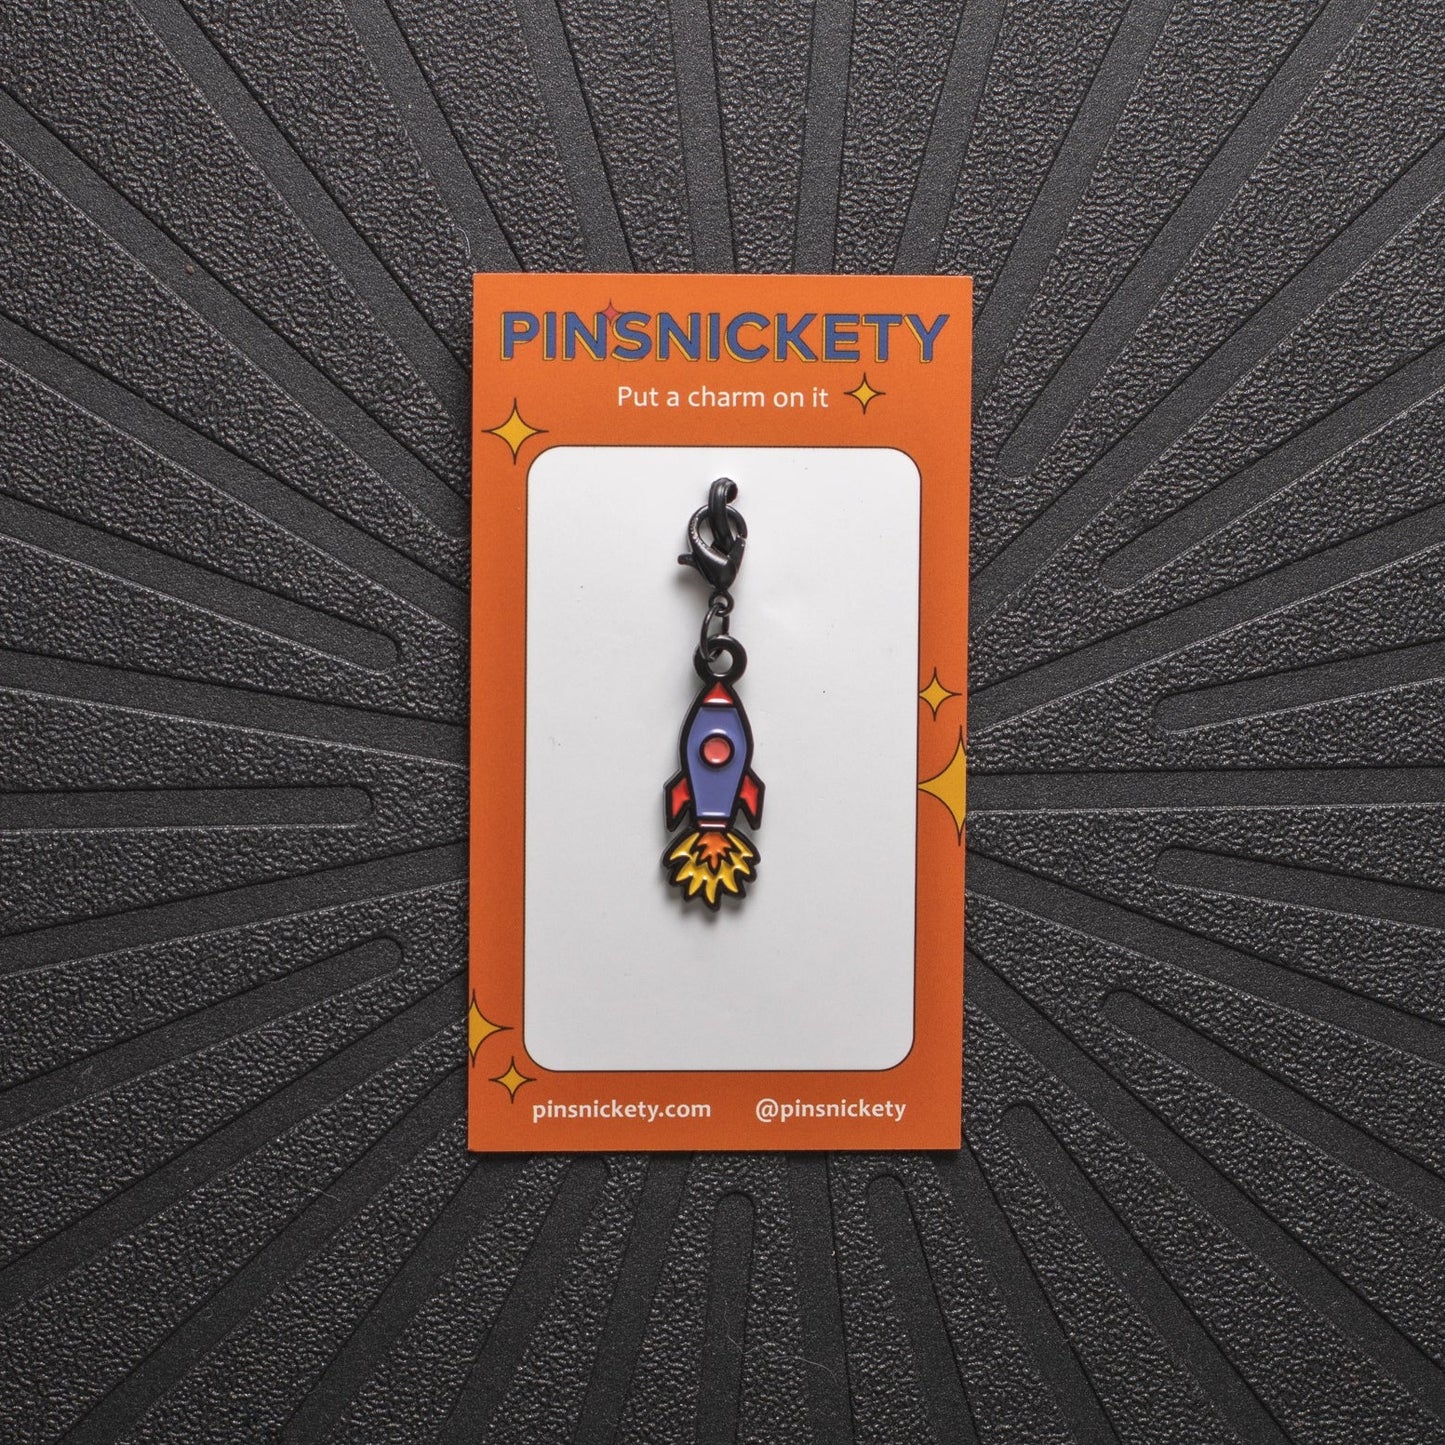 Pinsnickety rocket ship charm on its product packaging card